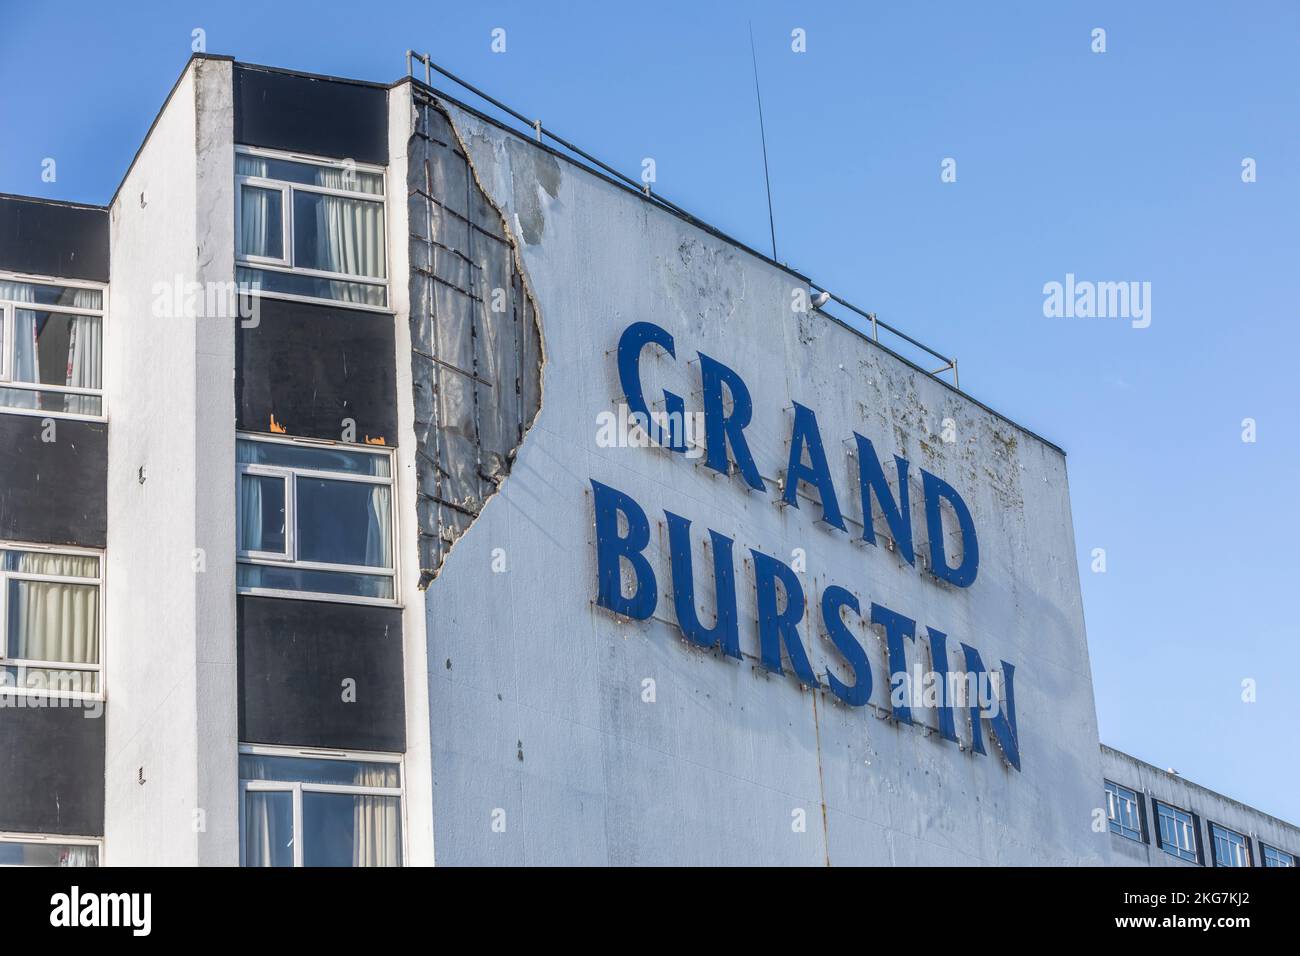 The collapesed section of wall on The Grand Burstin Hotel, Folkestone Stock Photo